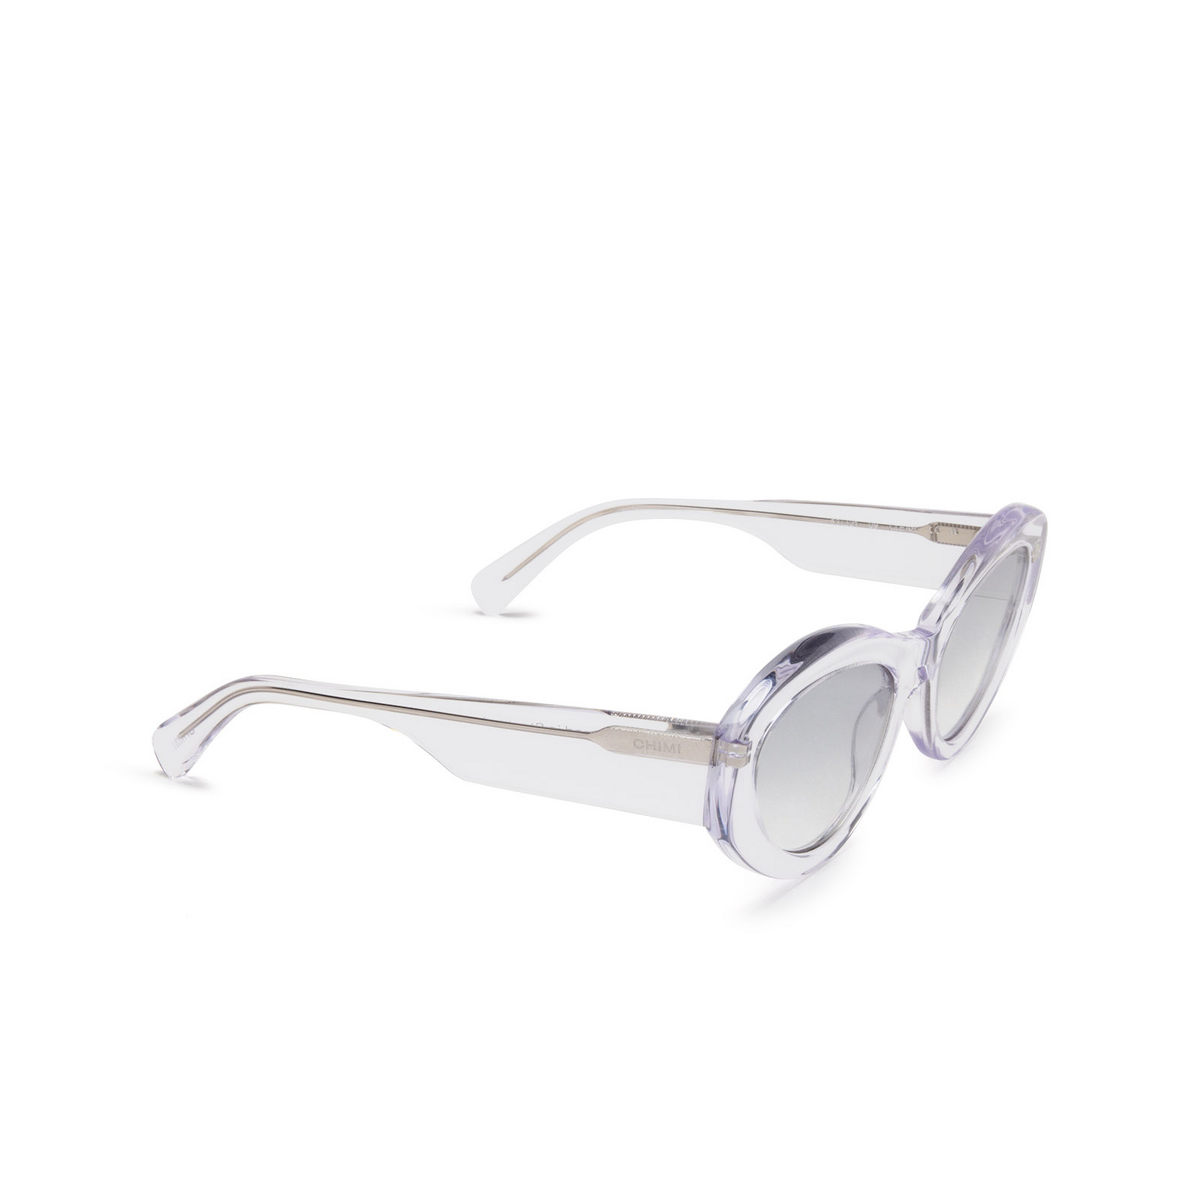 Chimi® Cat-eye Sunglasses: 09 color Clear - three-quarters view